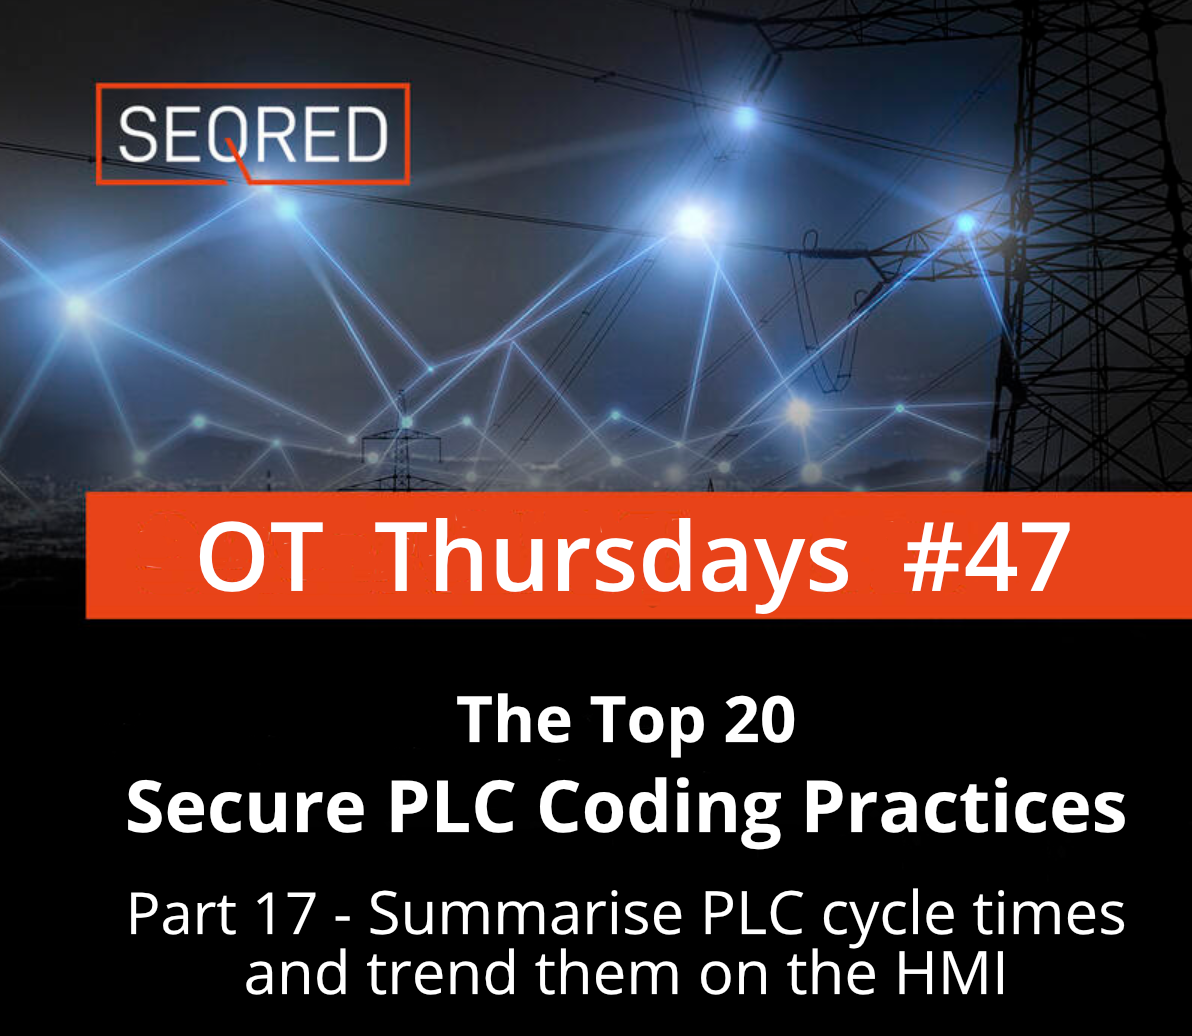 The Top 20 Secure PLC Coding Practices. Part 17 - Summarise PLC cycle times and trend them on the HMI